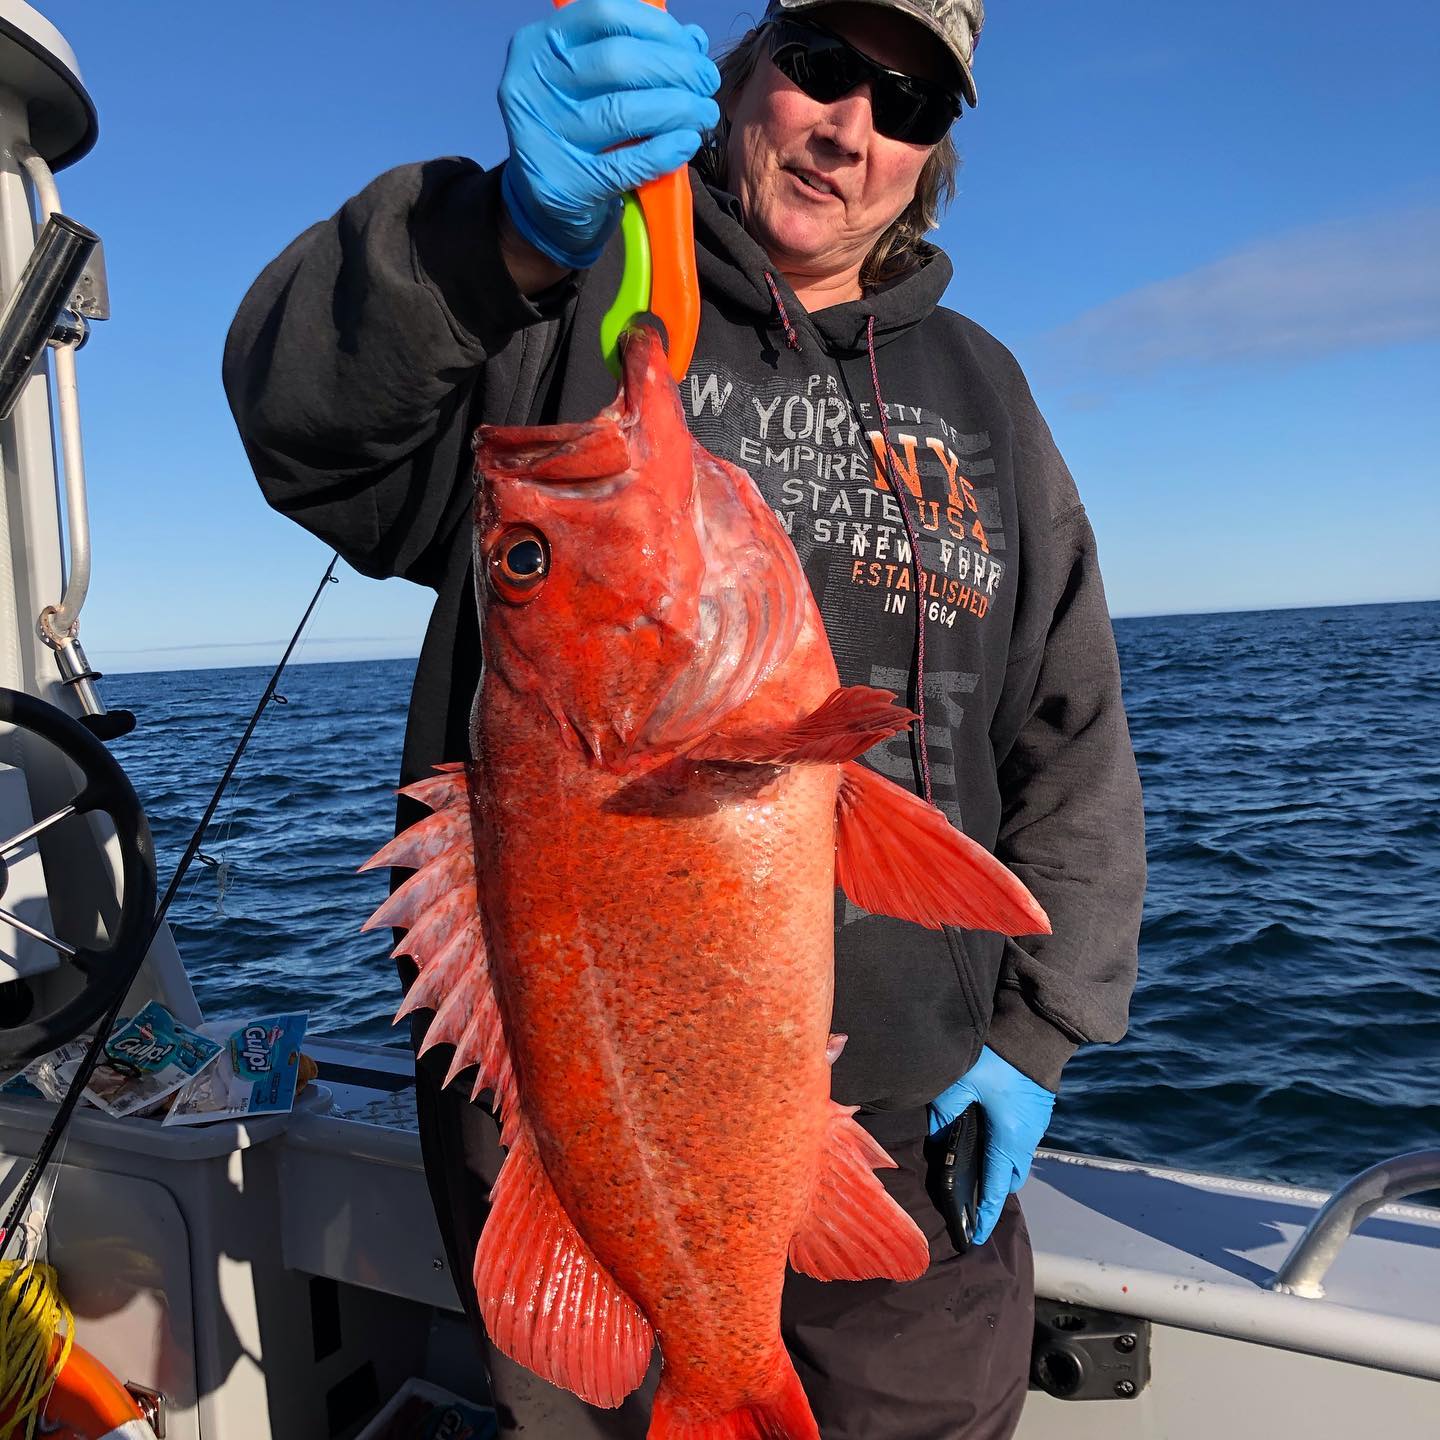 Guide holds up red rock fish